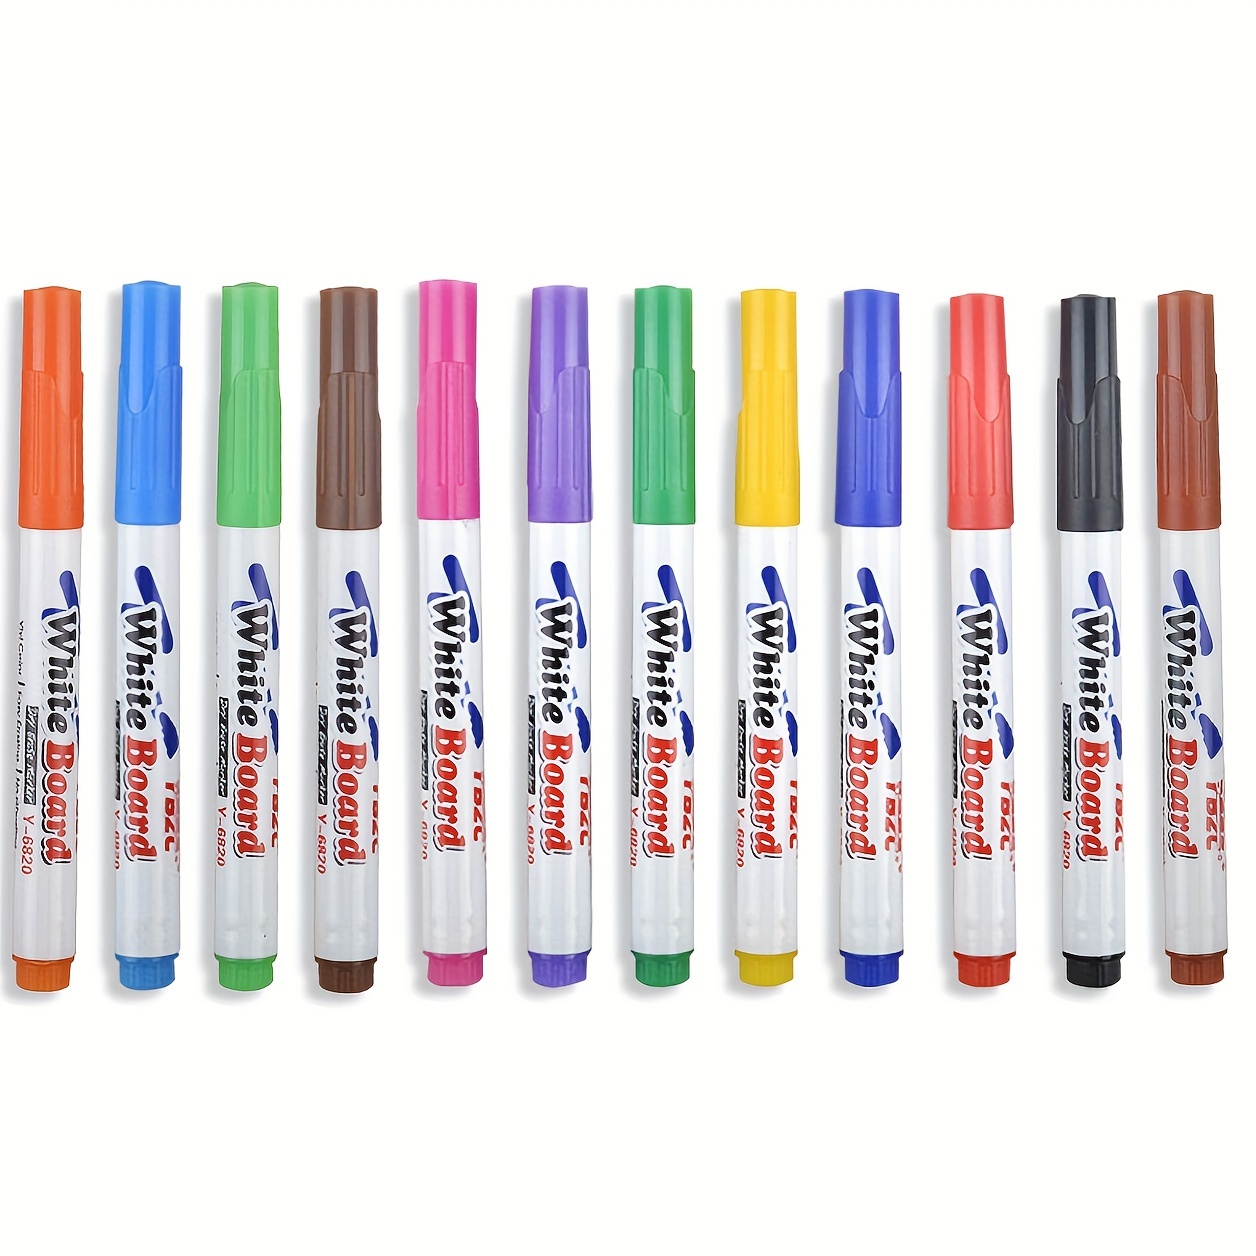 Newest Magical Water Painting Pen 4/8/12 Colors Colorful Mark Pen  Children's Early Education Toys Whiteboard Markers Doodle Pen